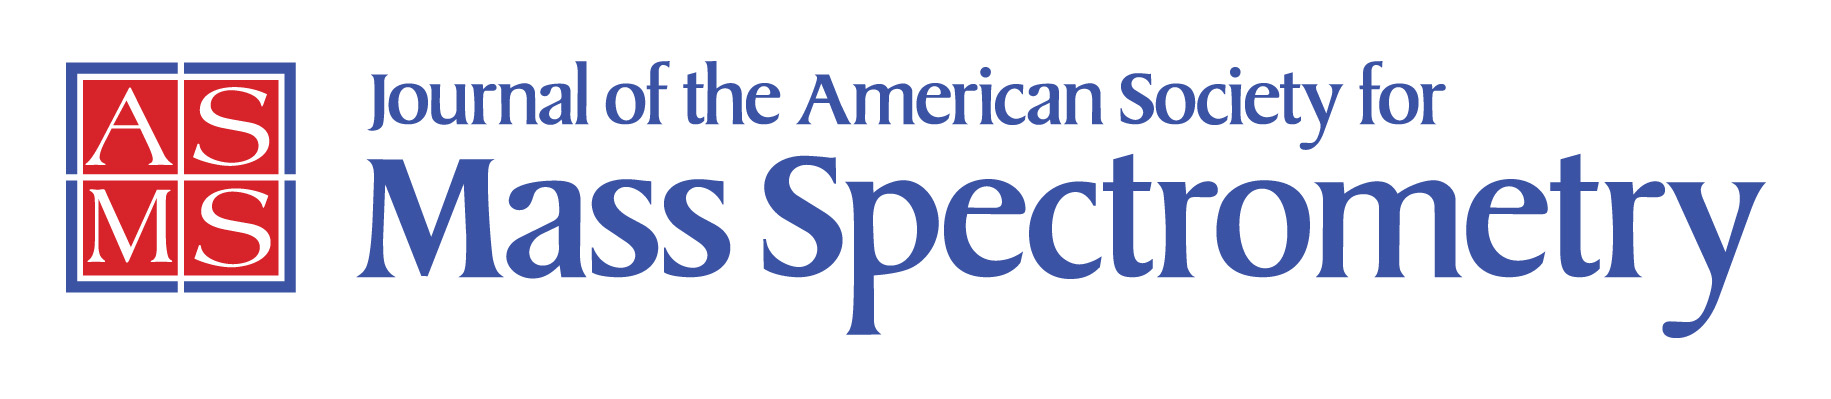 Journal of the American Society for Mass Spectrometry logo